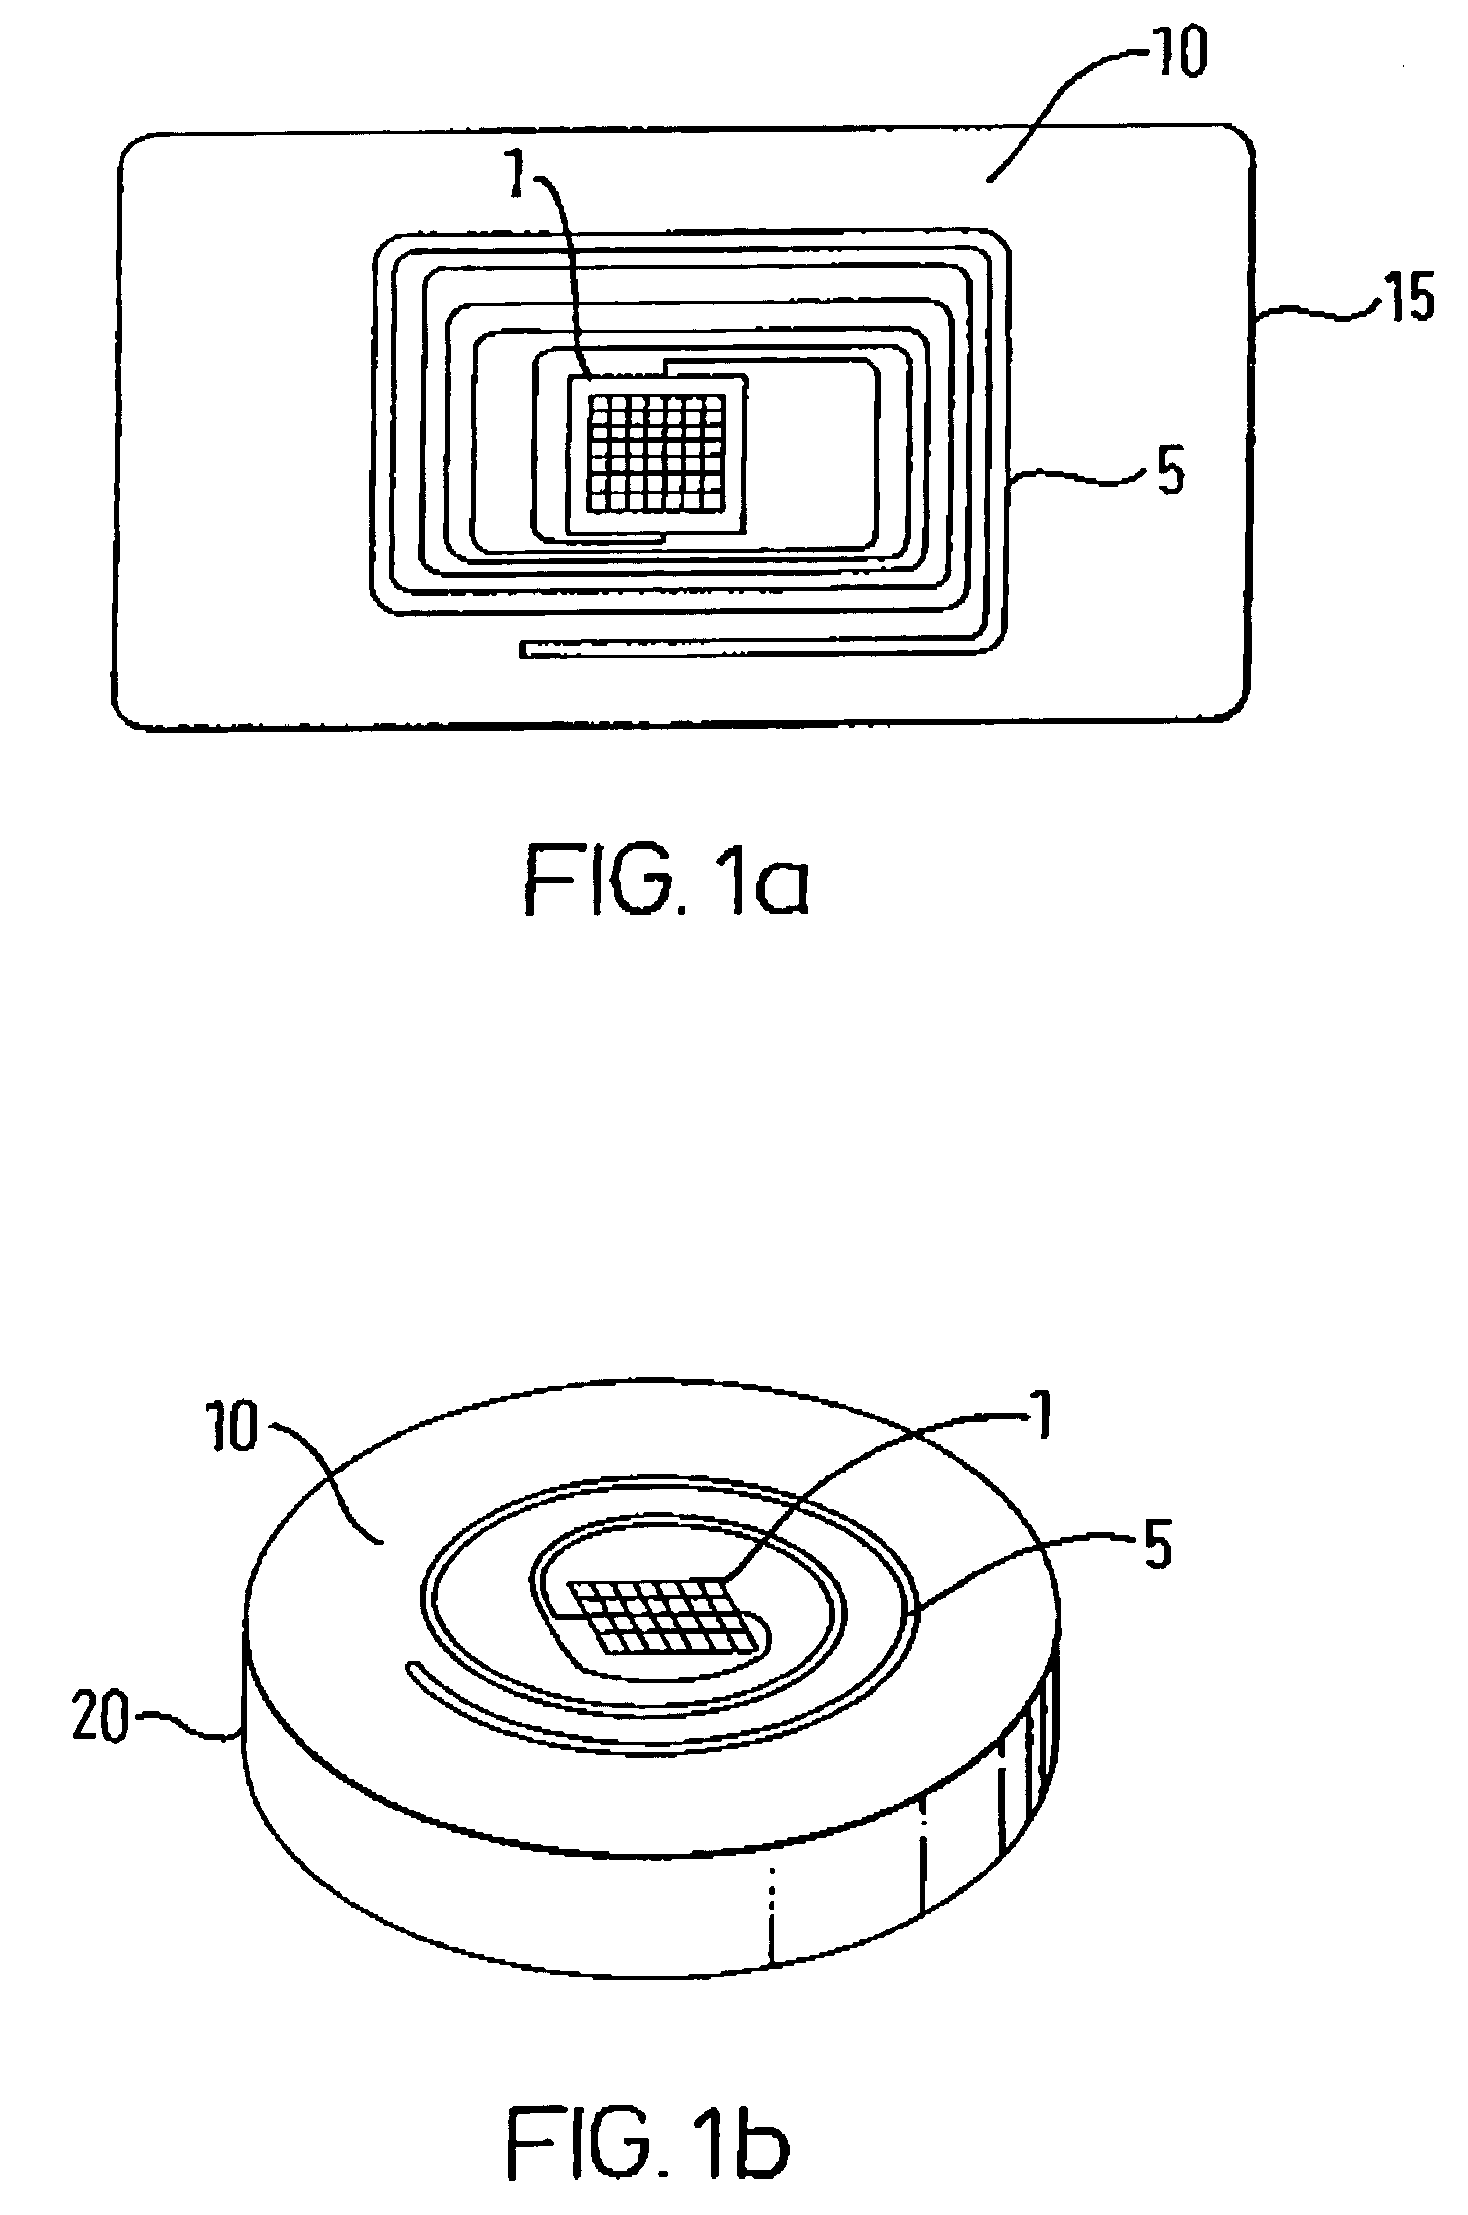 Method for monitoring objects with transponders